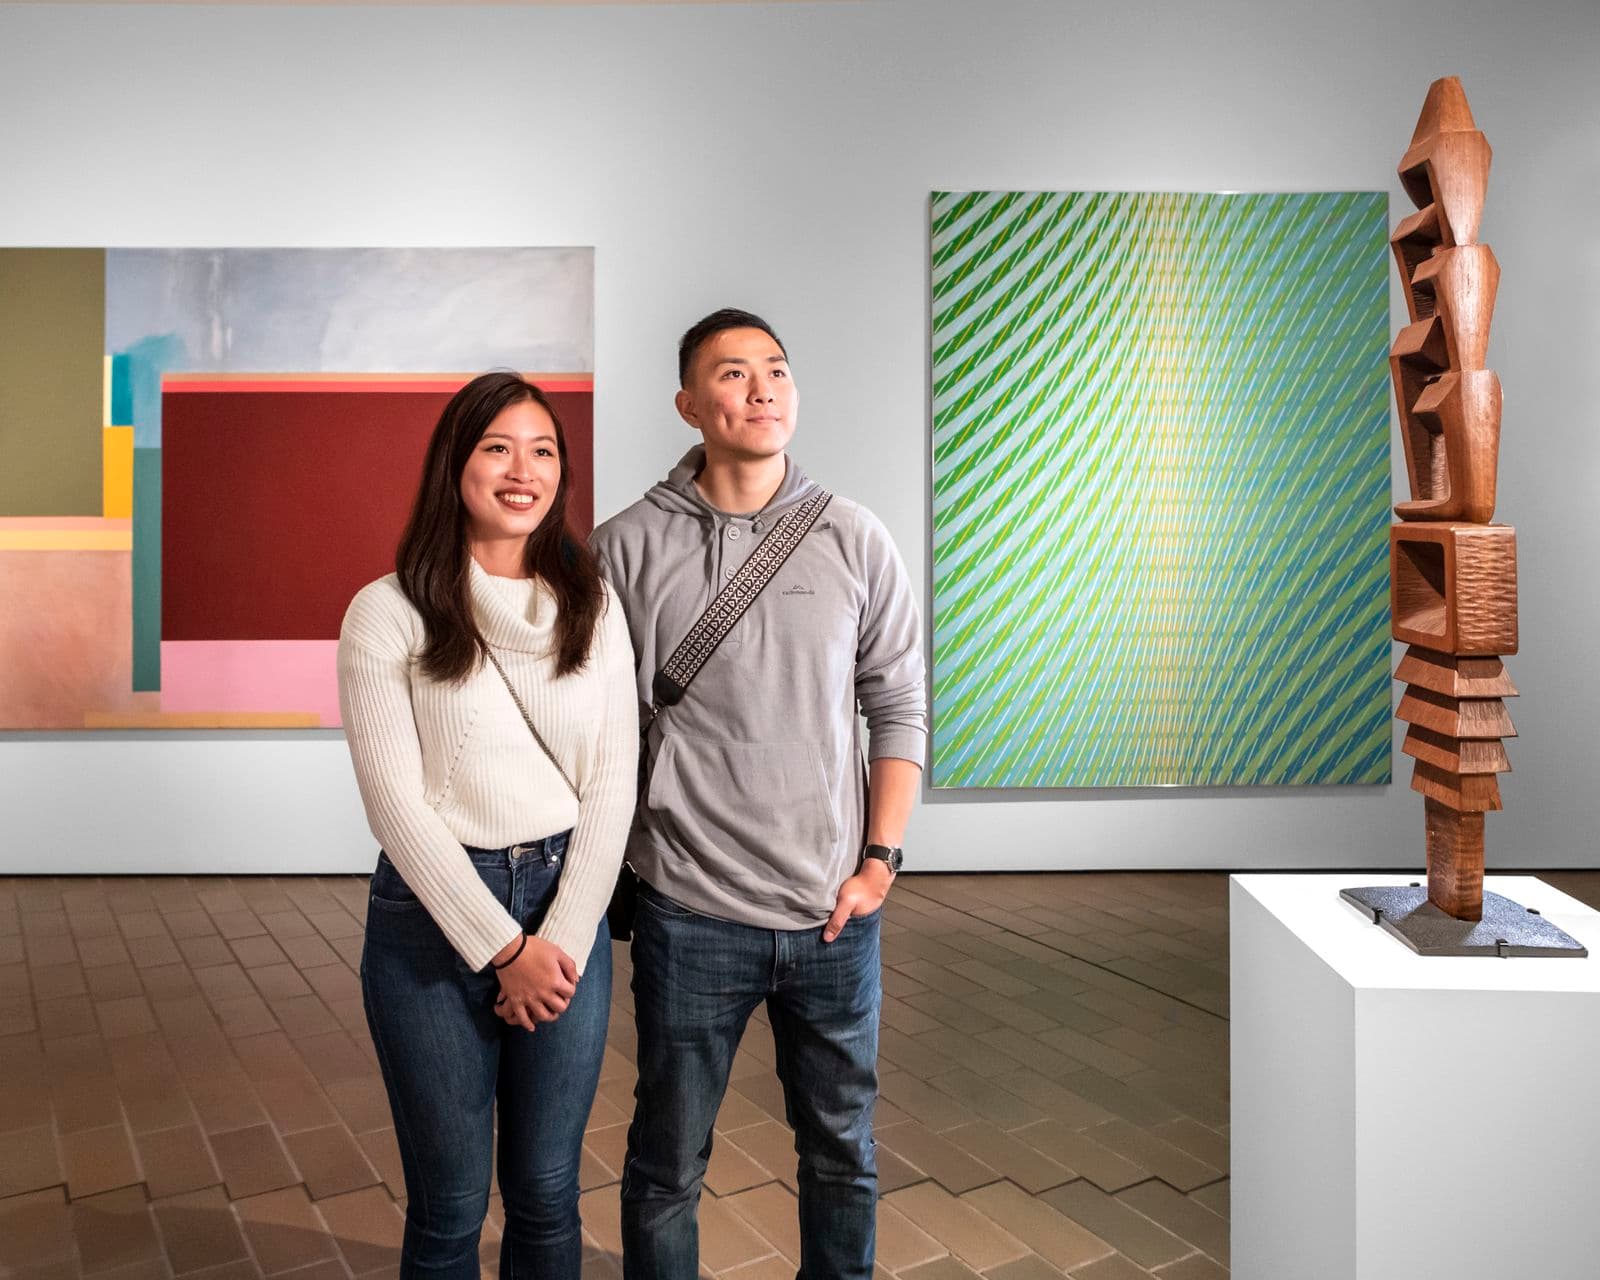 Photograph of couple standing in front of sculpture with paintings around them